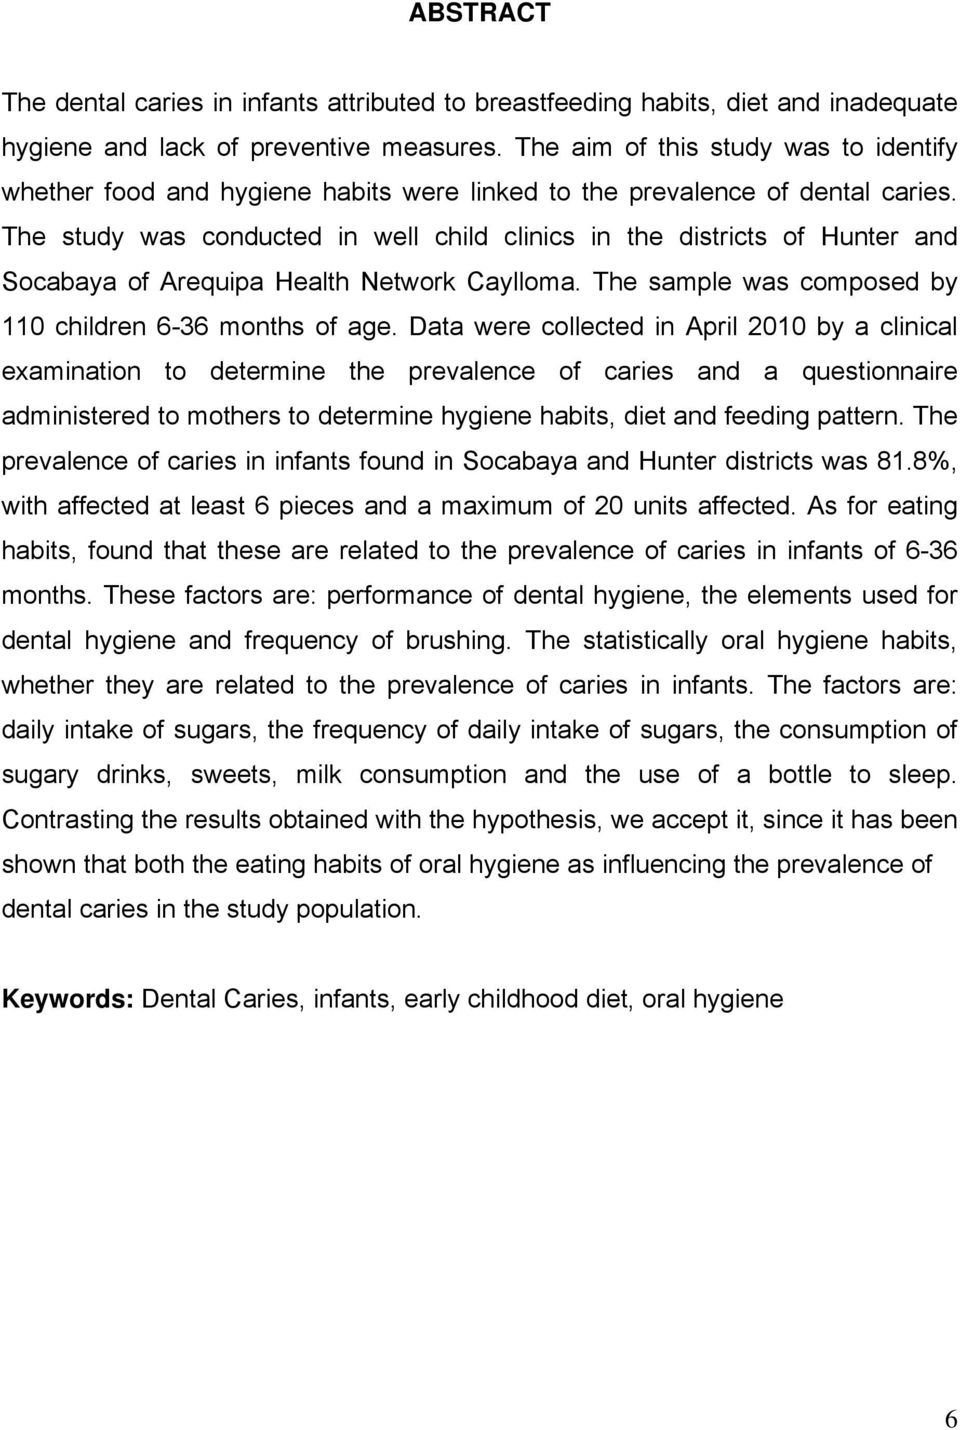 The study was conducted in well child clinics in the districts of Hunter and Socabaya of Arequipa Health Network Caylloma. The sample was composed by 110 children 6-36 months of age.